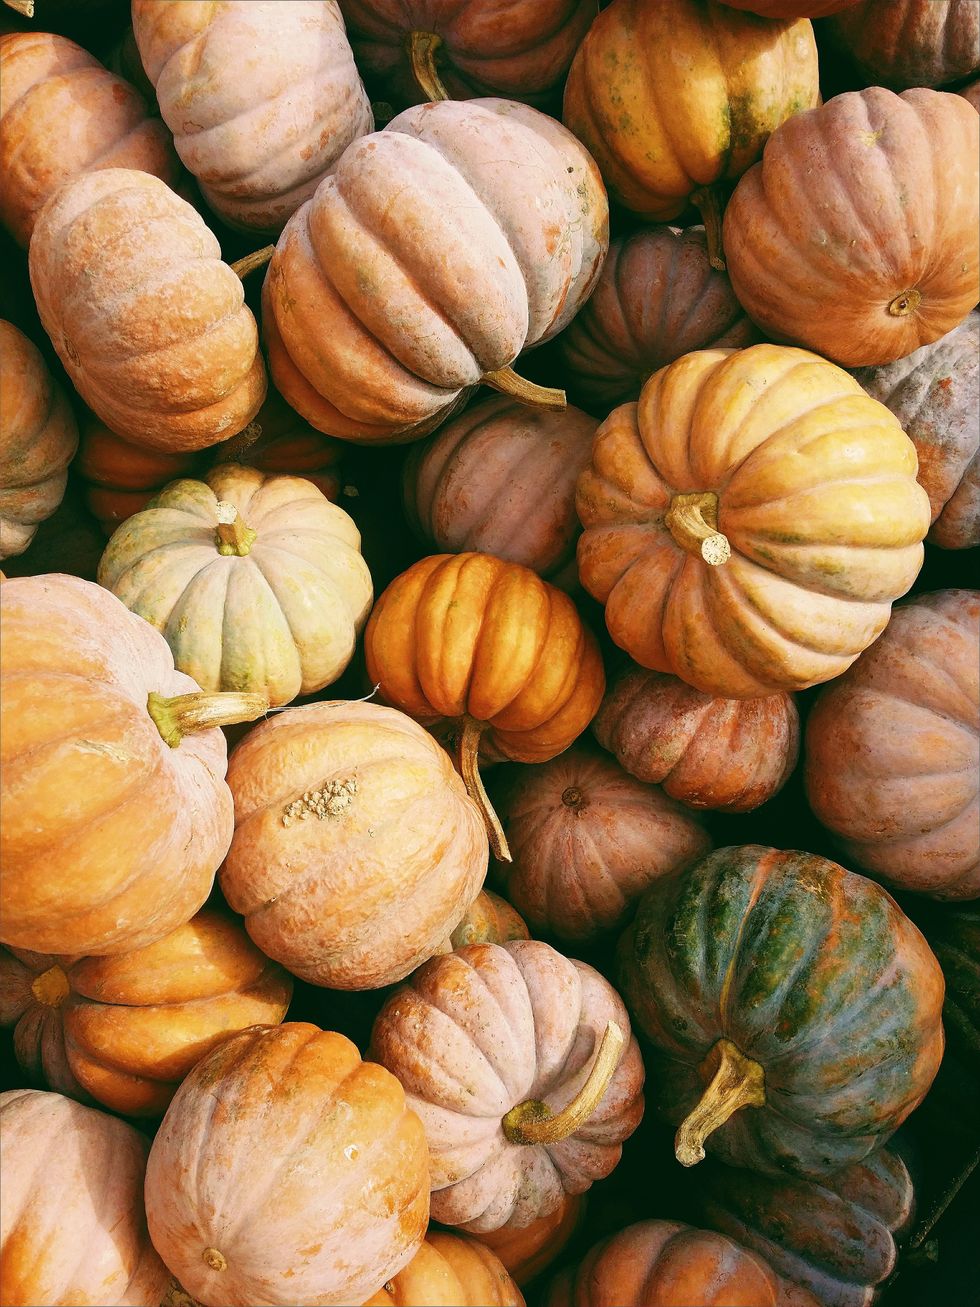 Fall Festivities That You Can Still Safely Enjoy This Year